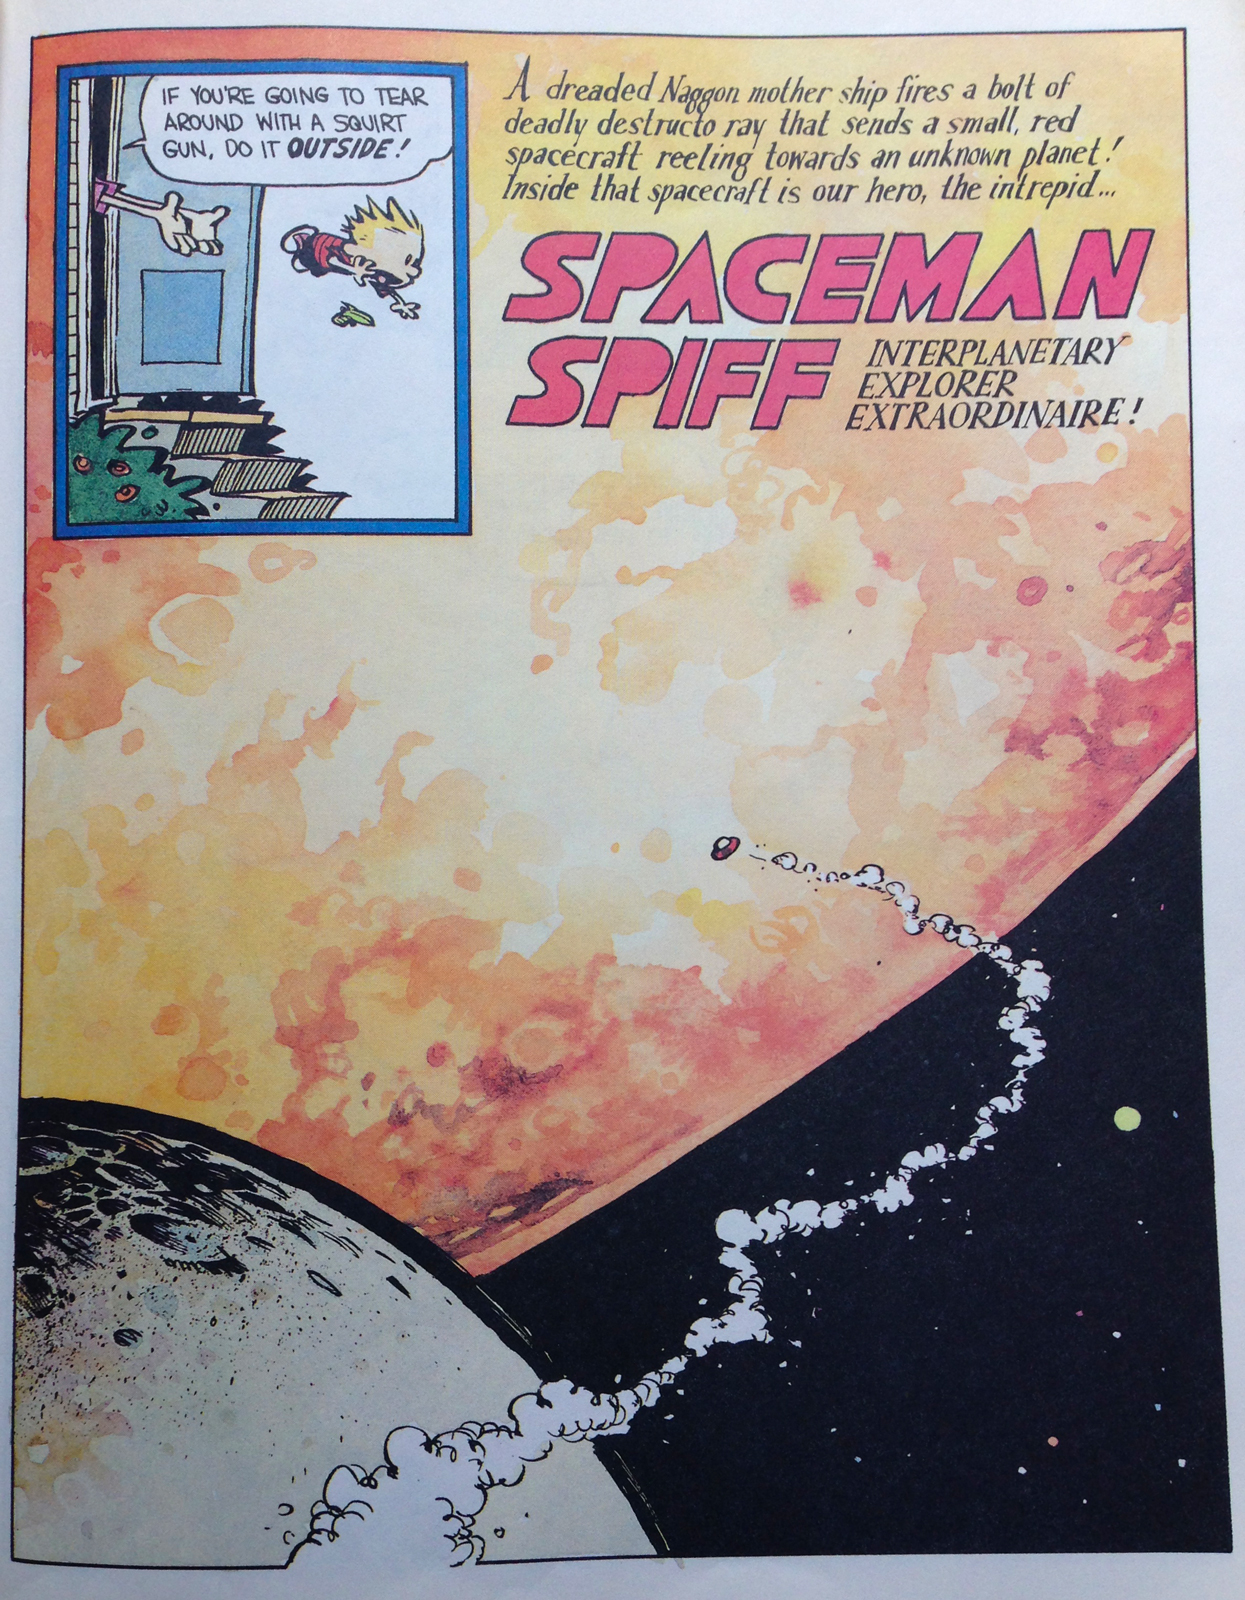 Spaceman-Spiff-and-planets